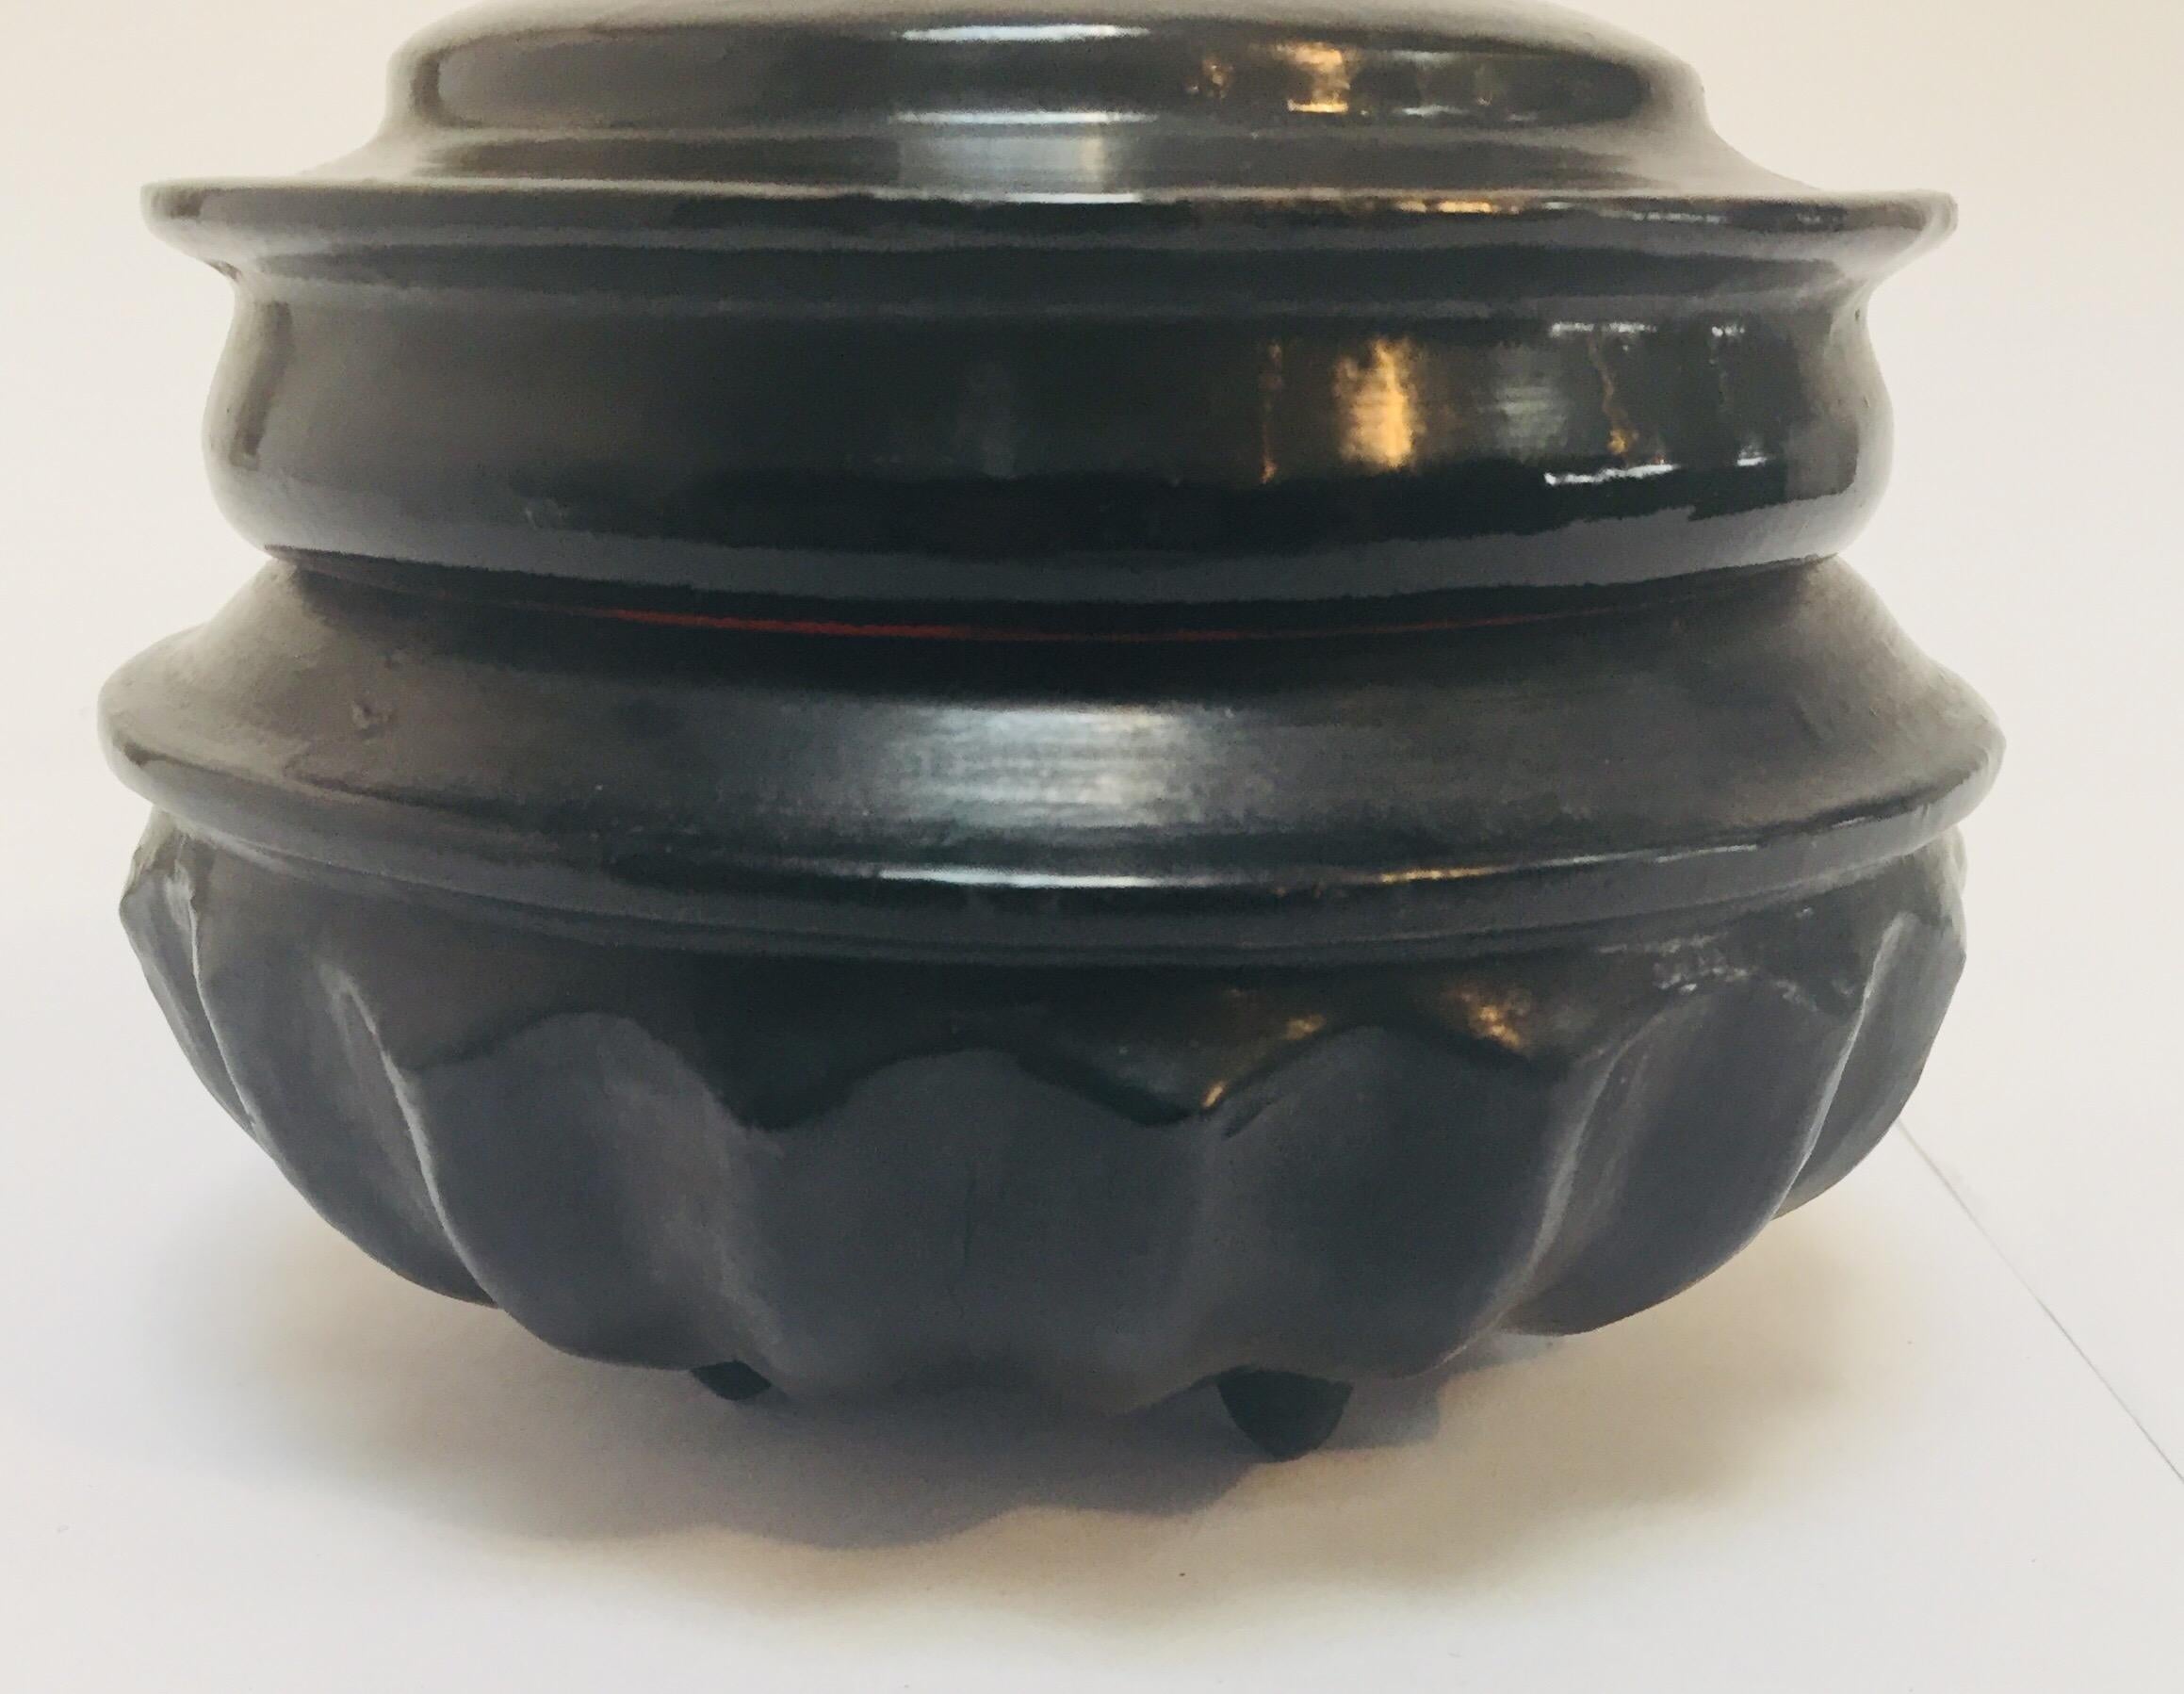 South Asian Burmese black and red lacquer box, offering vessel urn with compartment for storage.
This round lacquer ware box from Burma is made from bamboo and lacquer.
In Burma (now called Myanmar), lacquer receptacles called hsun-ok were used for